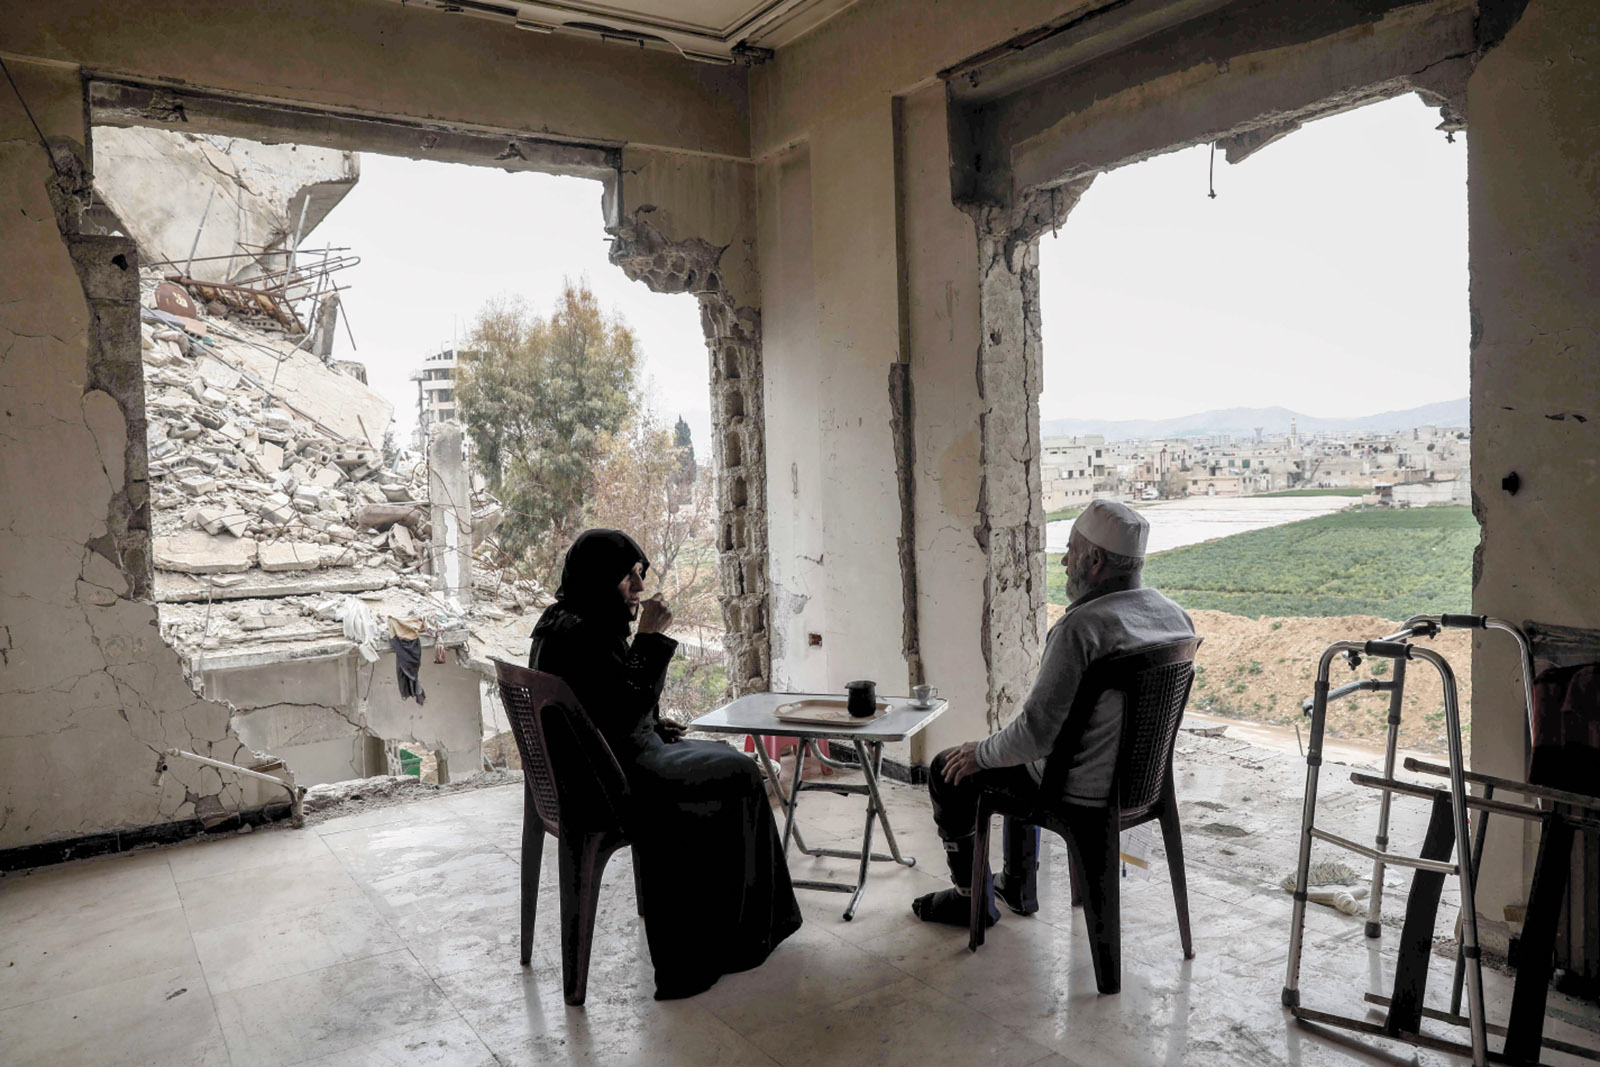 Umm Mohammed and her husband drinking coffee at their destroyed home in the rebel-held town of Douma, on the outskirts of Damascus, March 2017